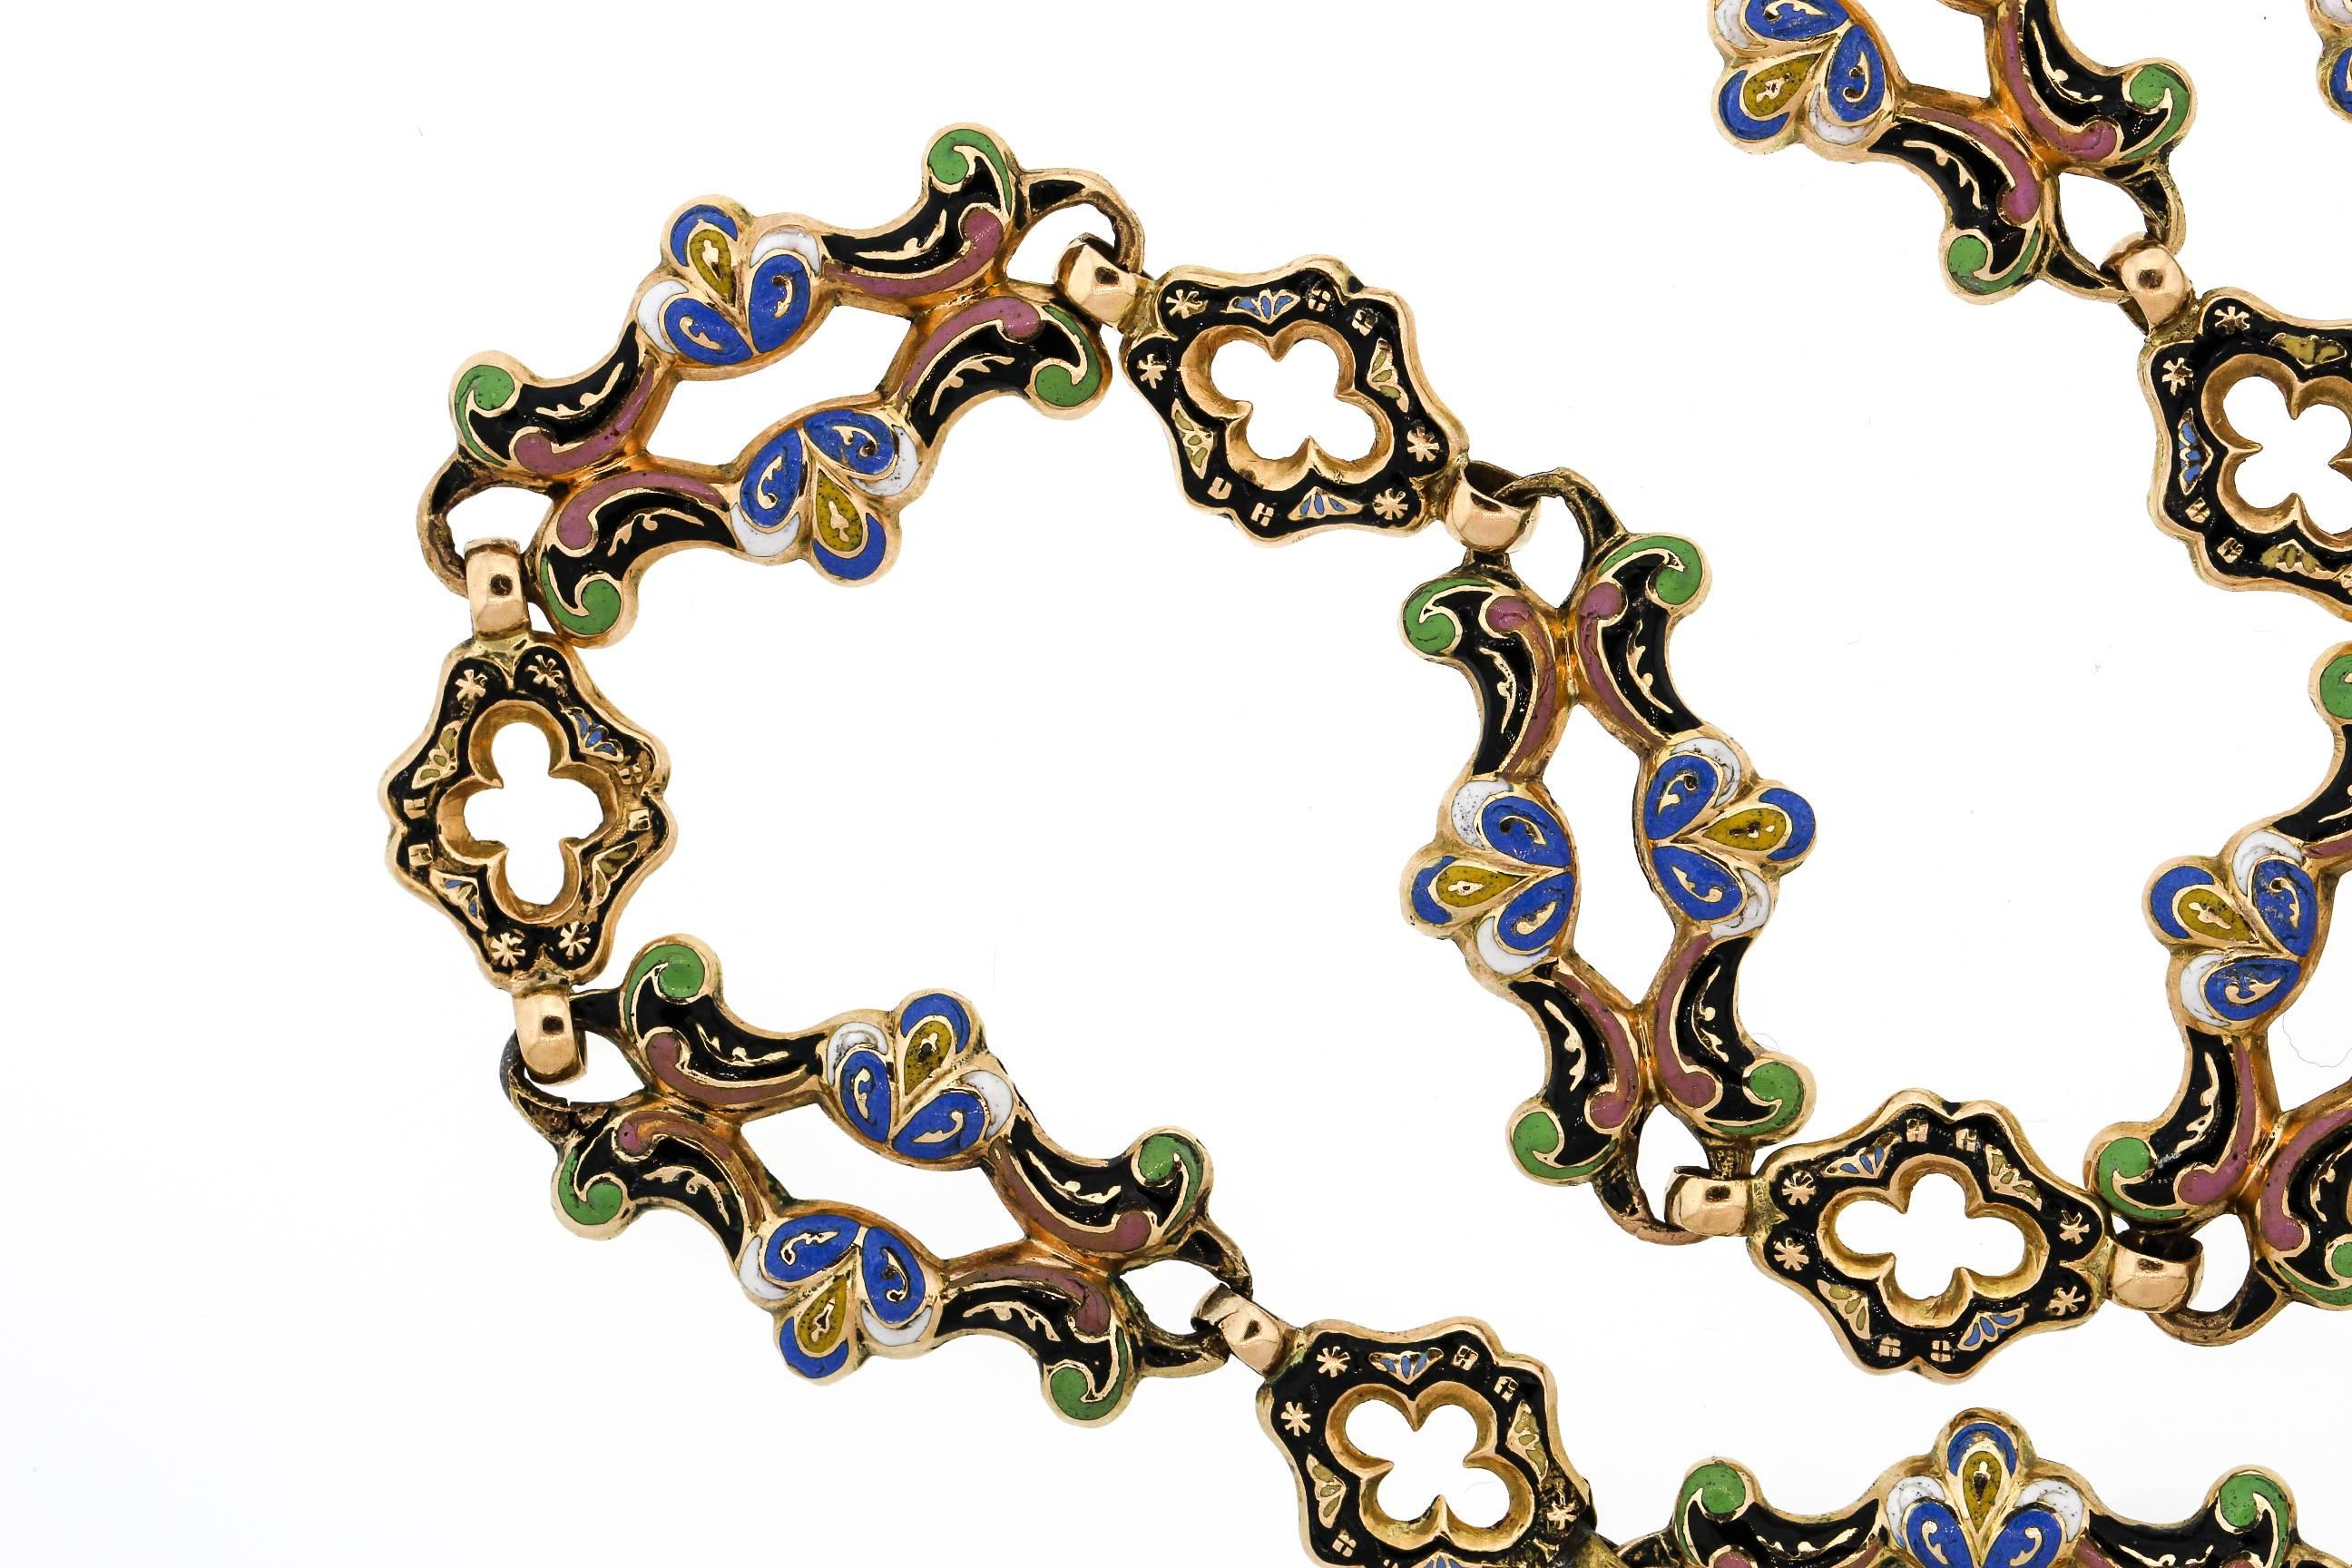 This is a stunning example of a Swiss Enamel long chain. Likely made around 1830, this 18k chain features large and small scalloped links that are enamel with the most gorgeous colors. Light blue and pink and green is accented by black and gold. The